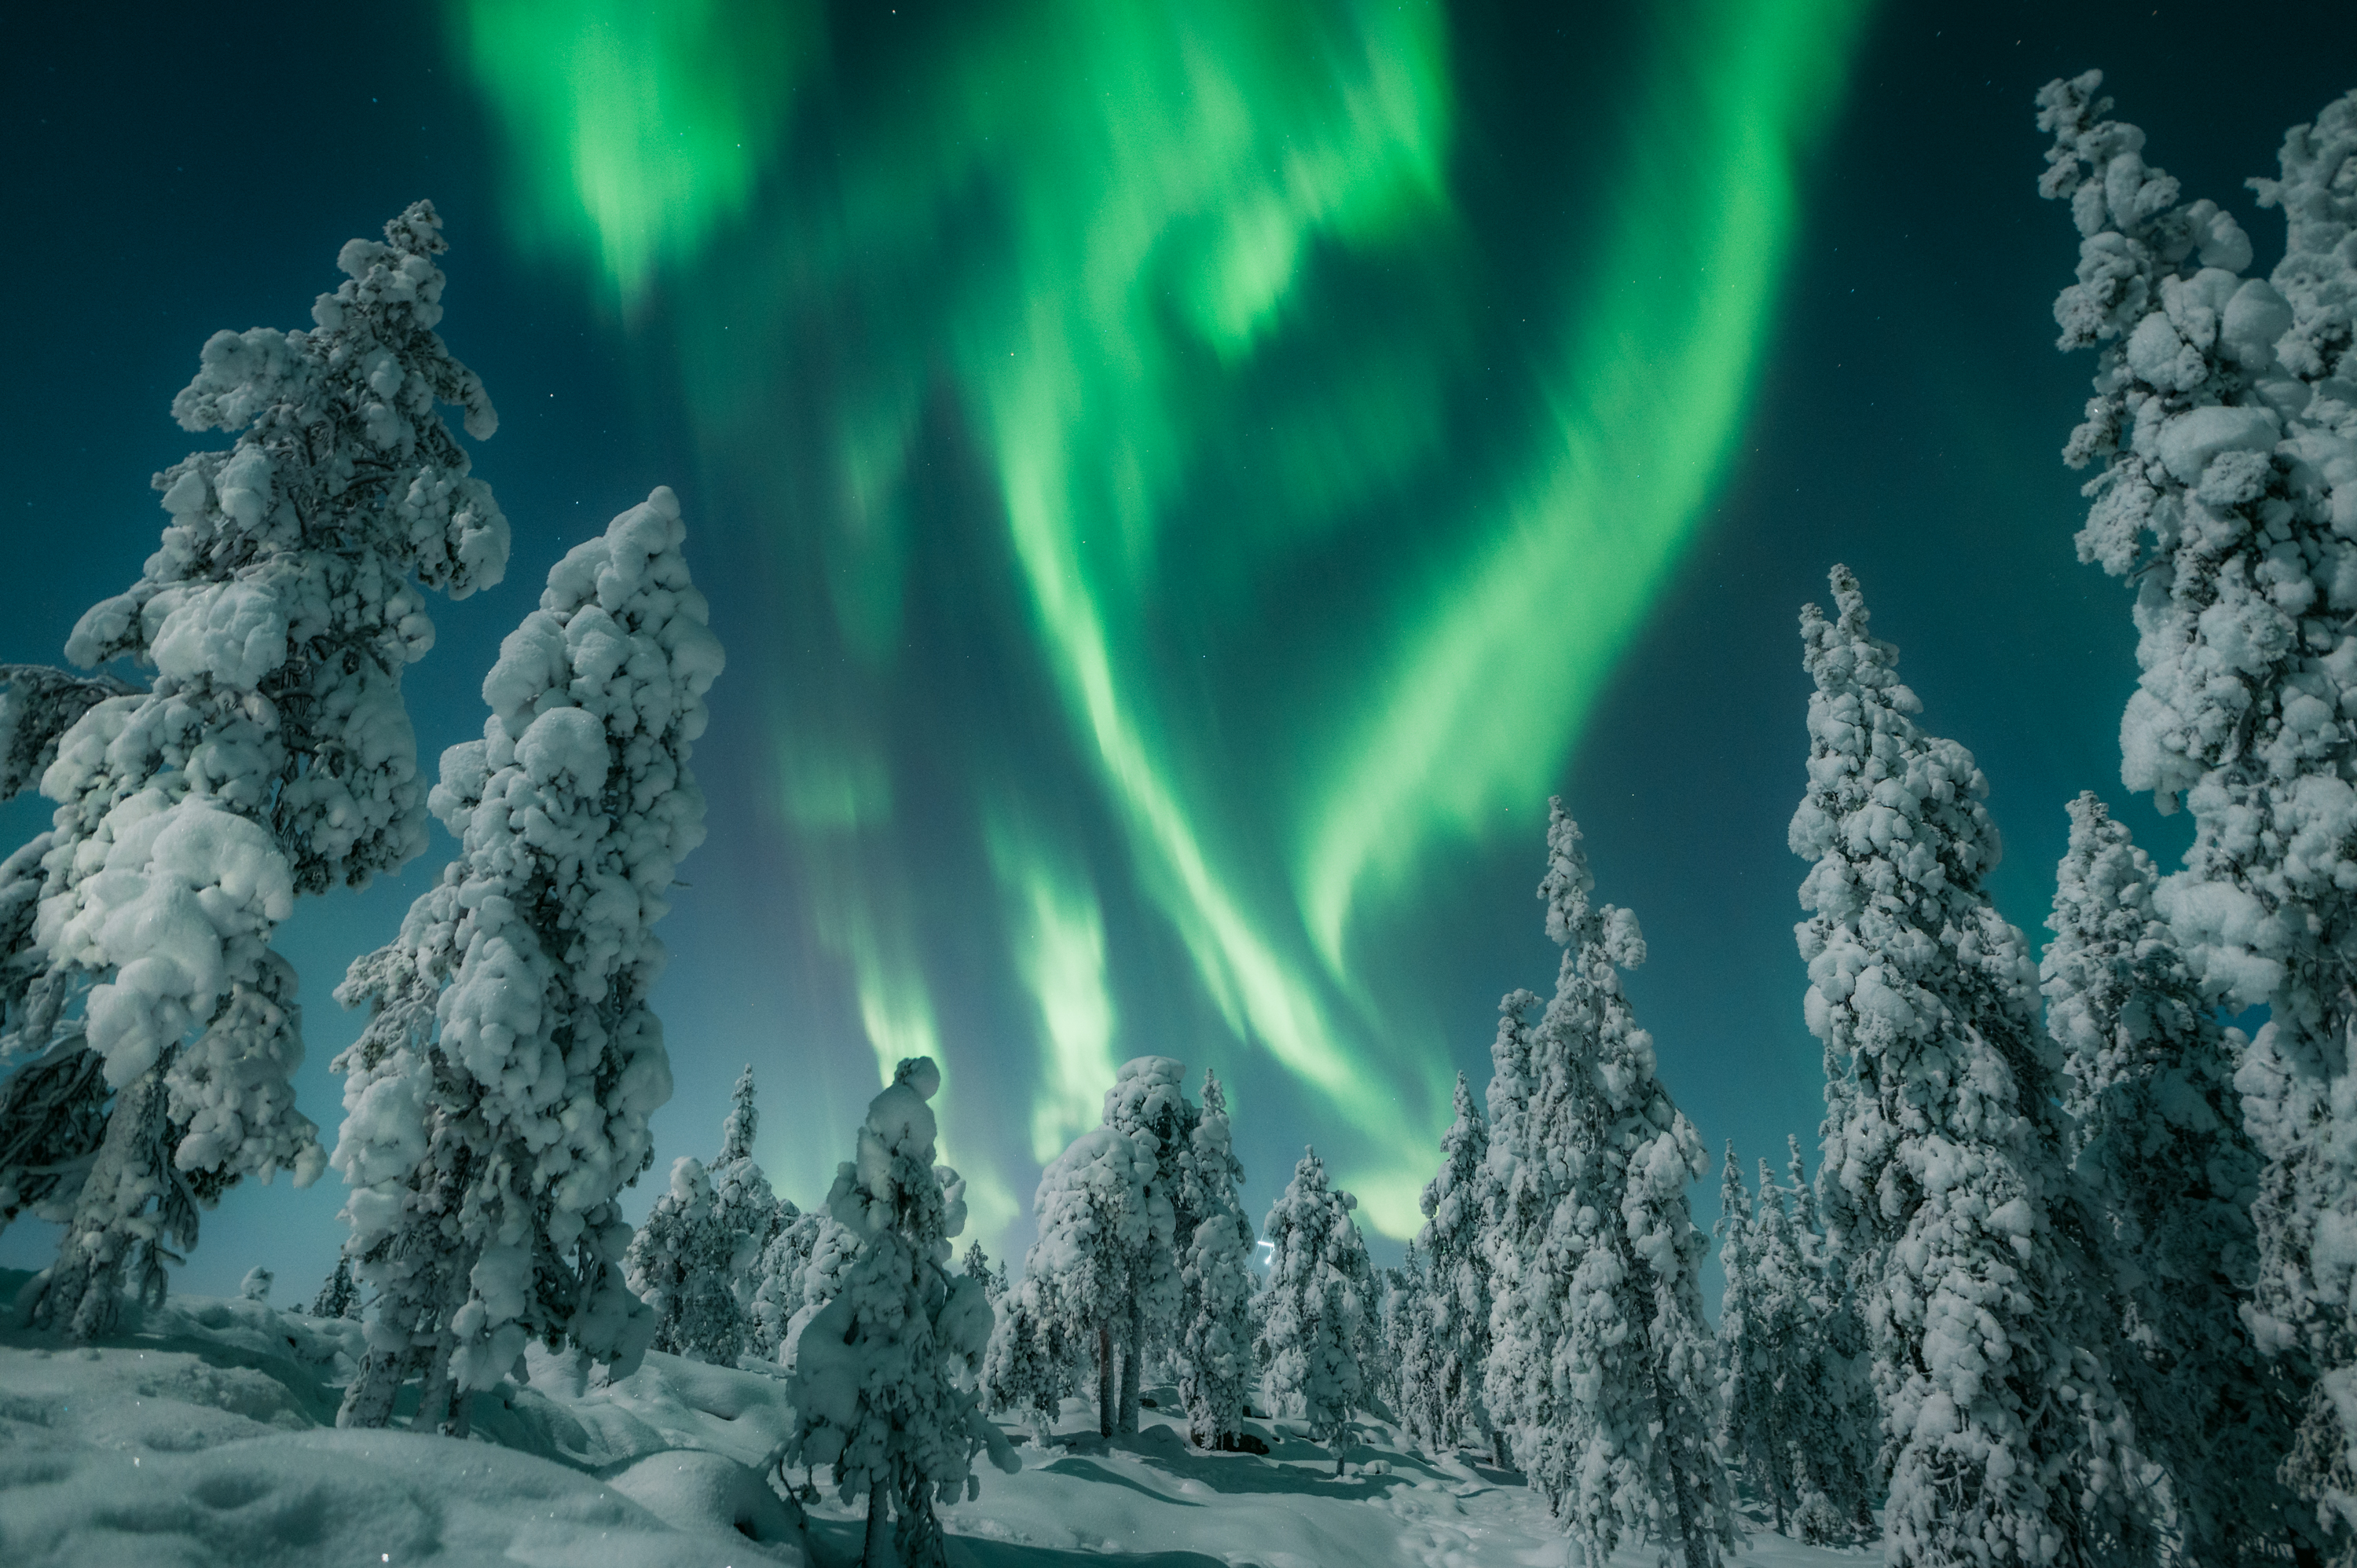 Northern Lights dancing in the sky in Rovaniemi, Lapland, Finland.